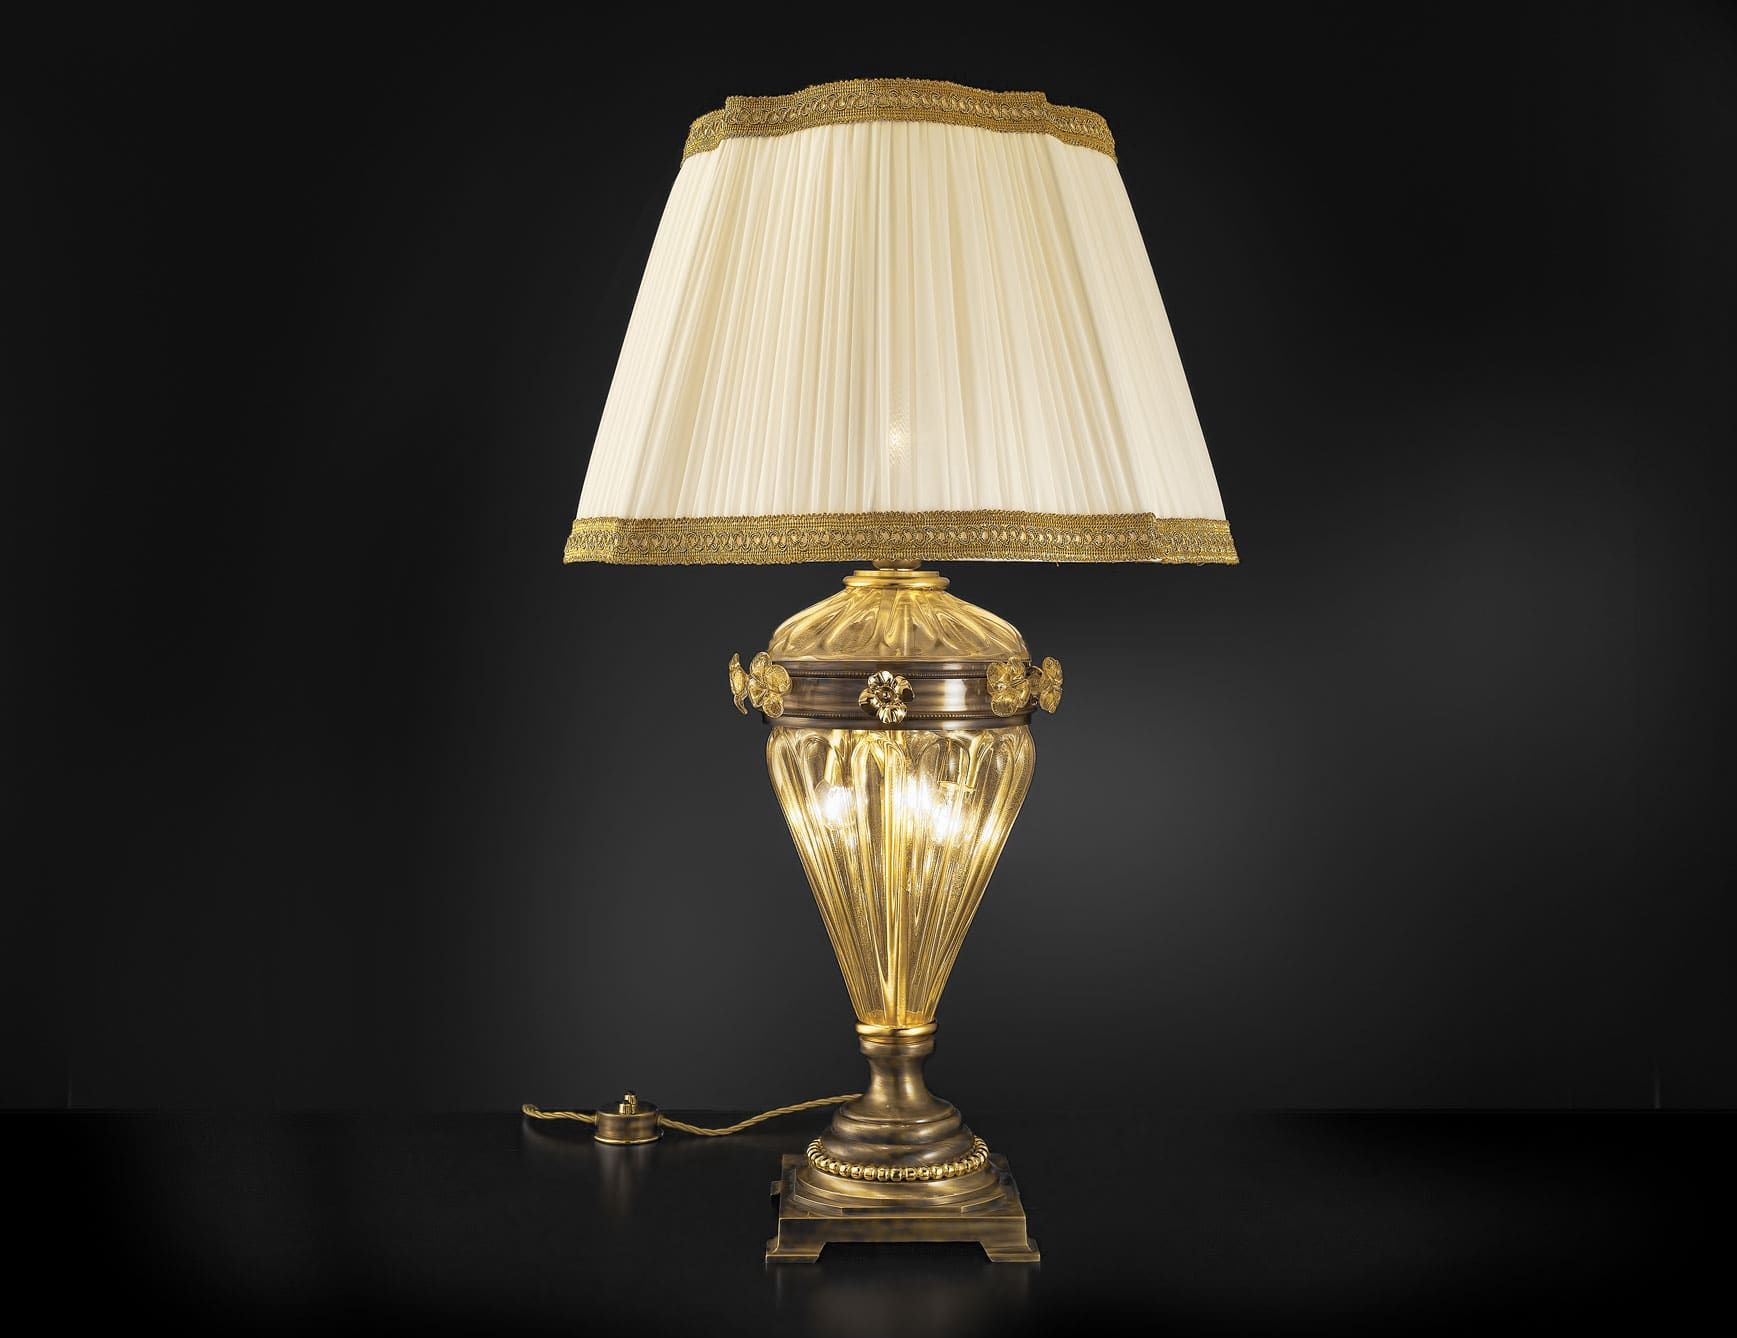 Impero modern luxury table lamp with gold murano glass